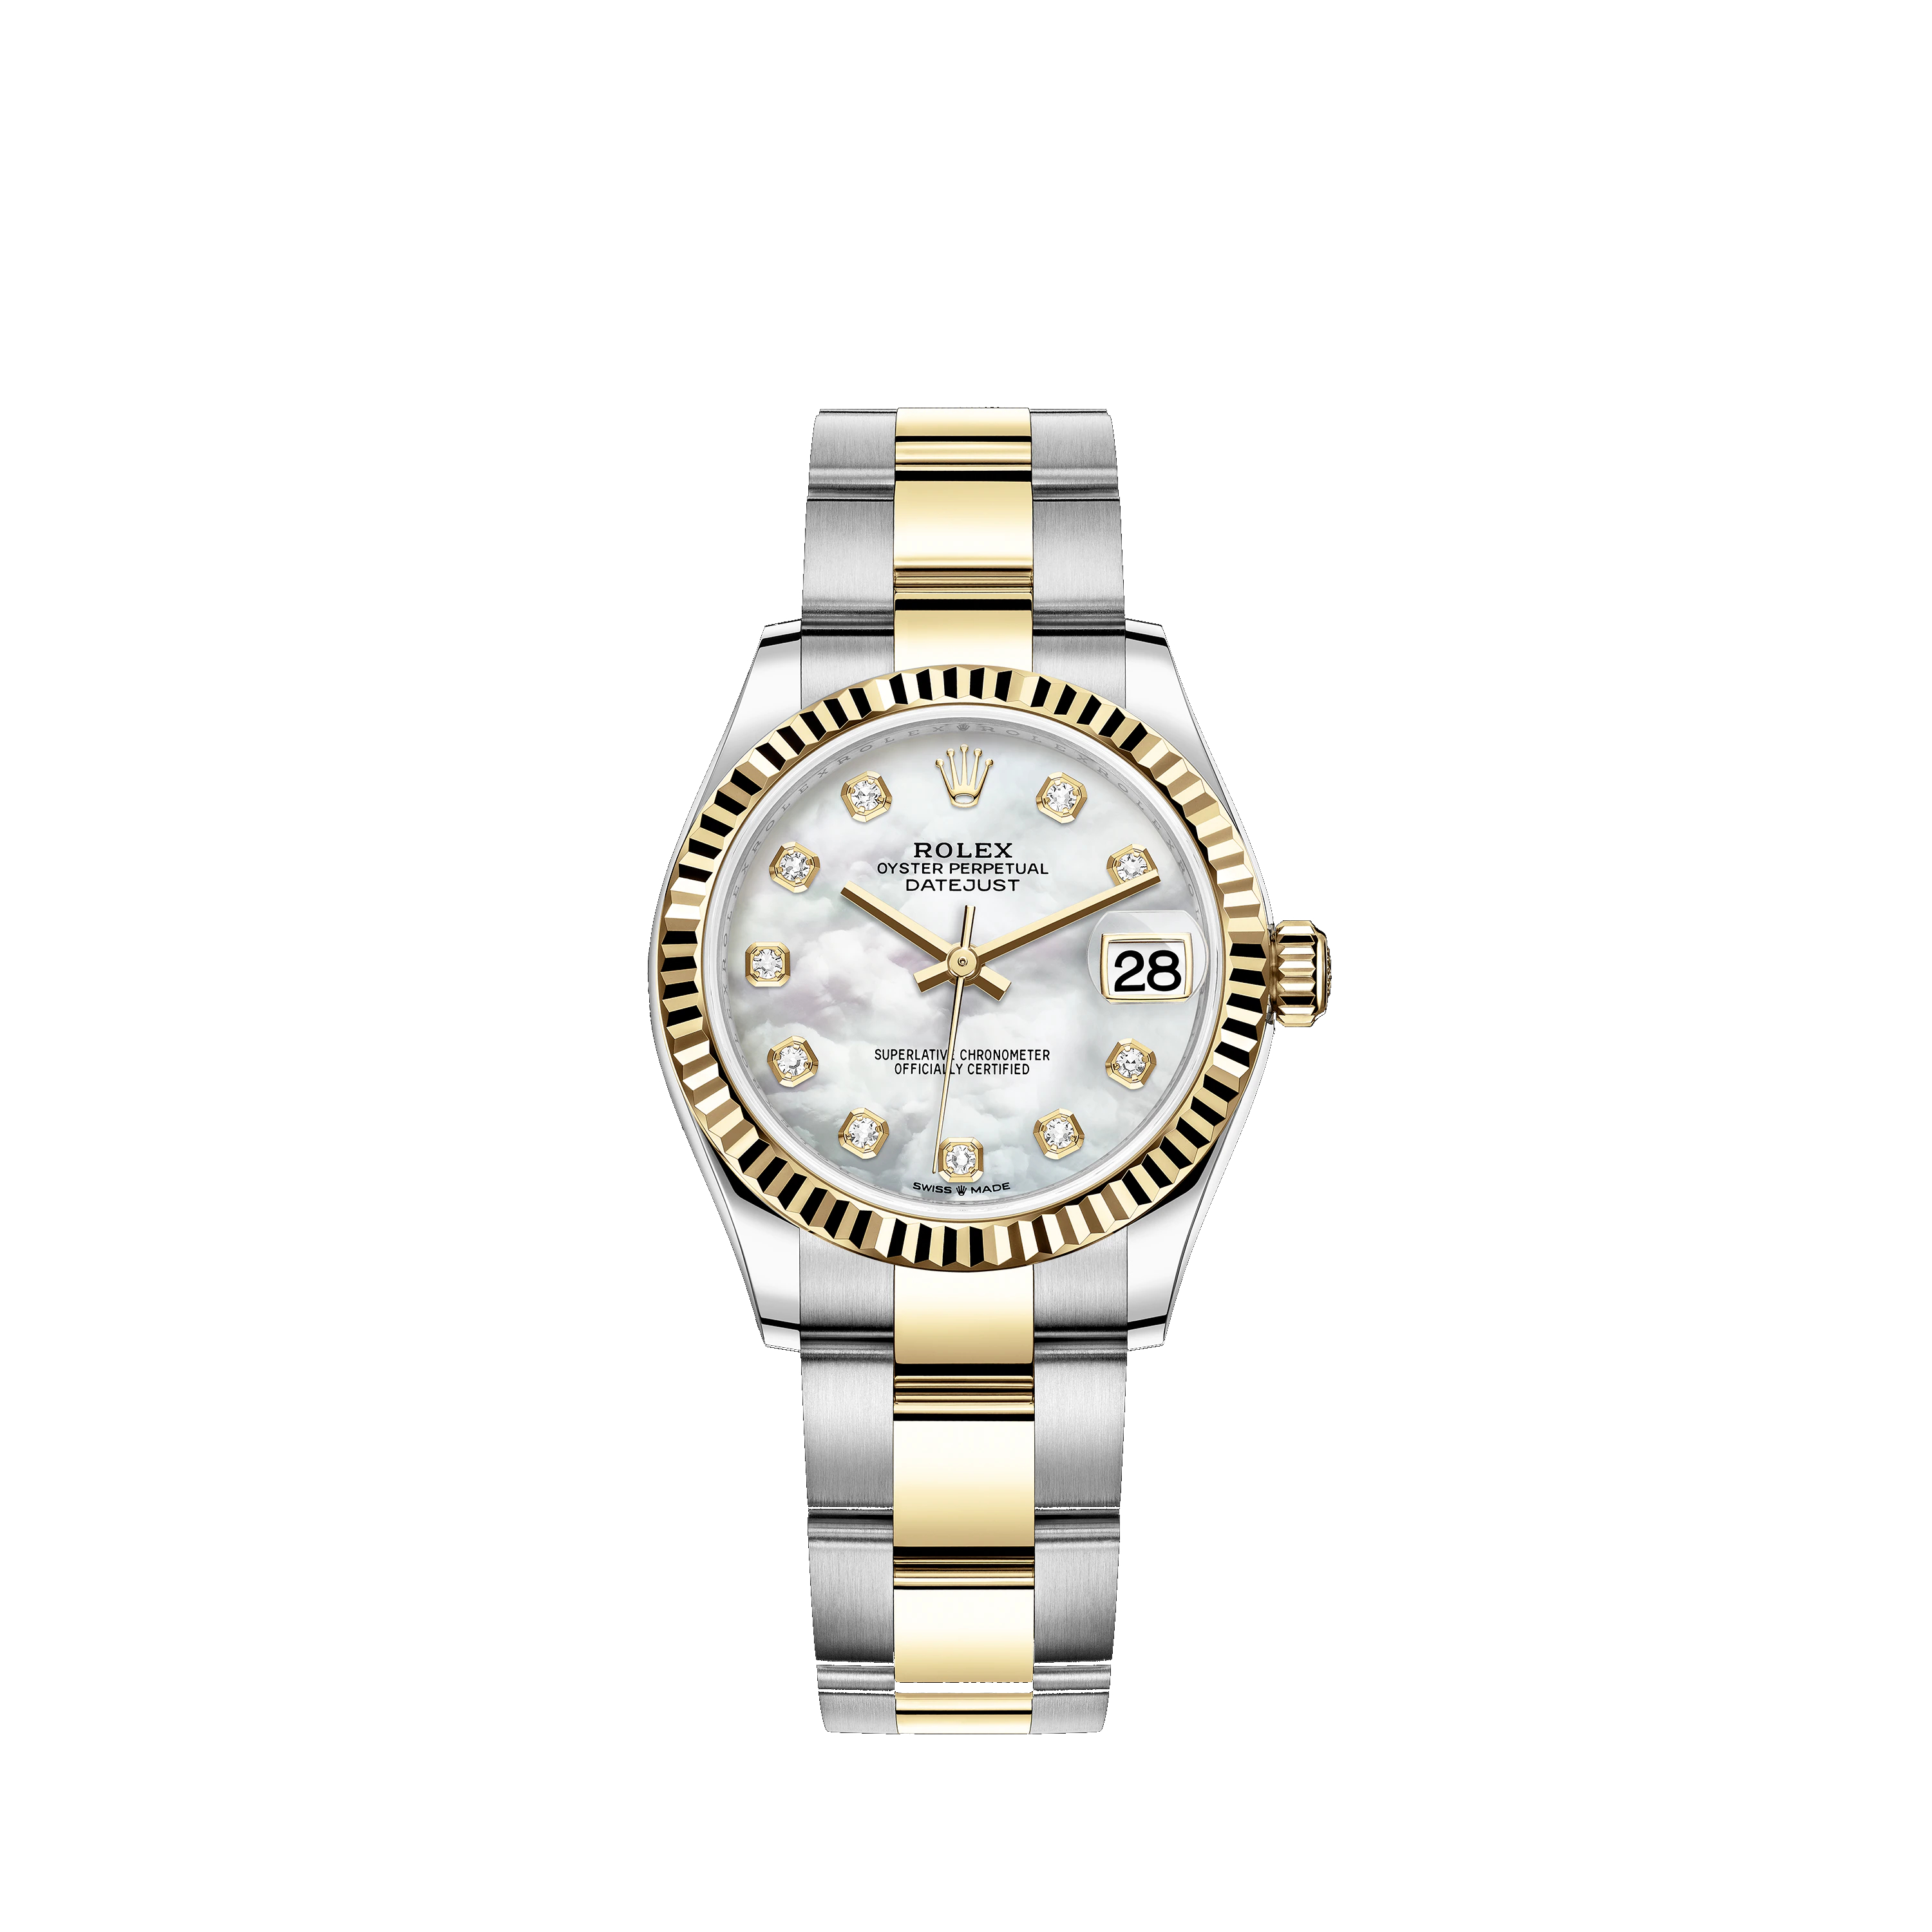 Datejust 31 278273 Gold & Stainless Steel Watch (White Mother-of-Pearl Set with Diamonds)